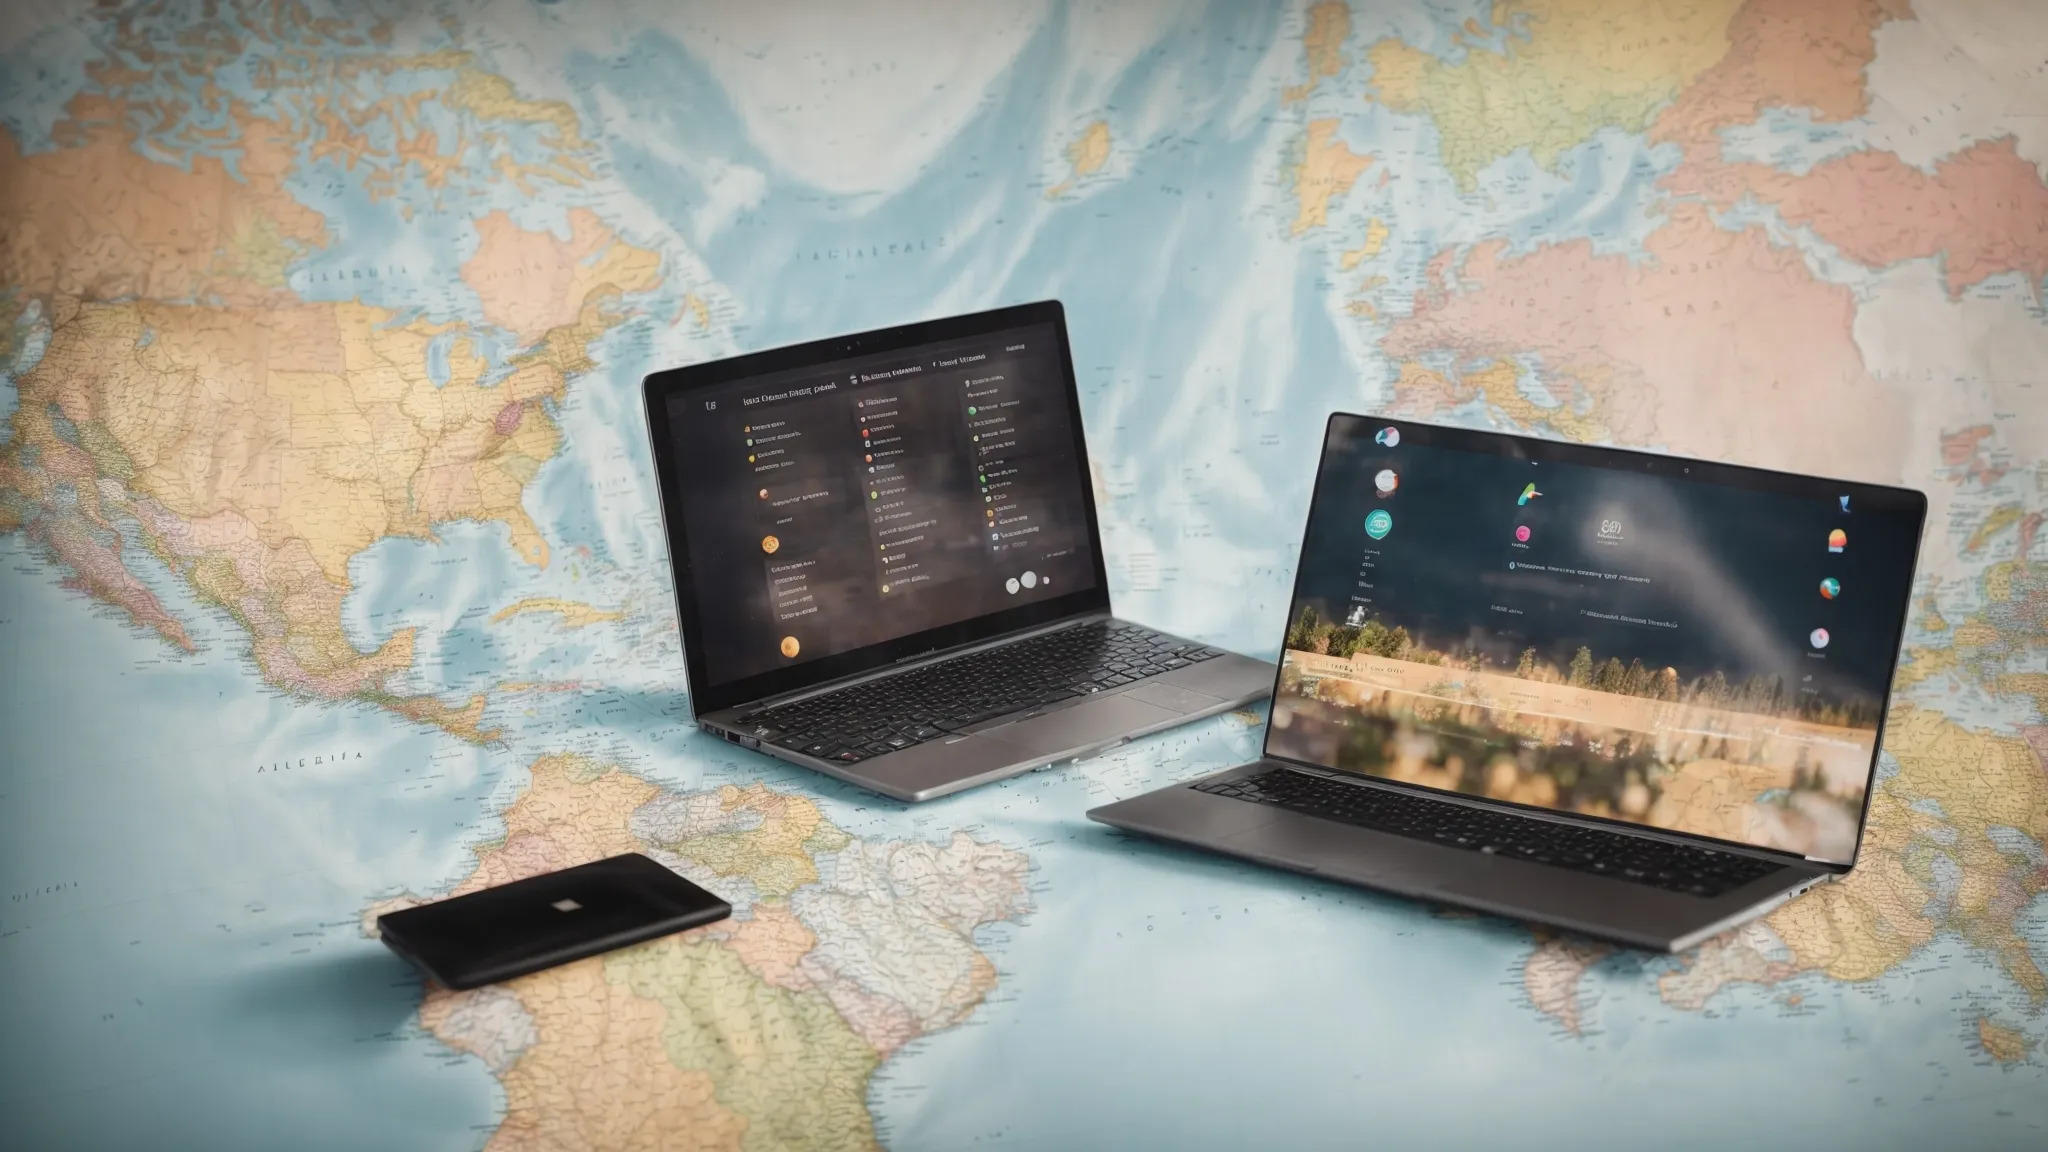 a laptop on a world map with pin markers over different countries.